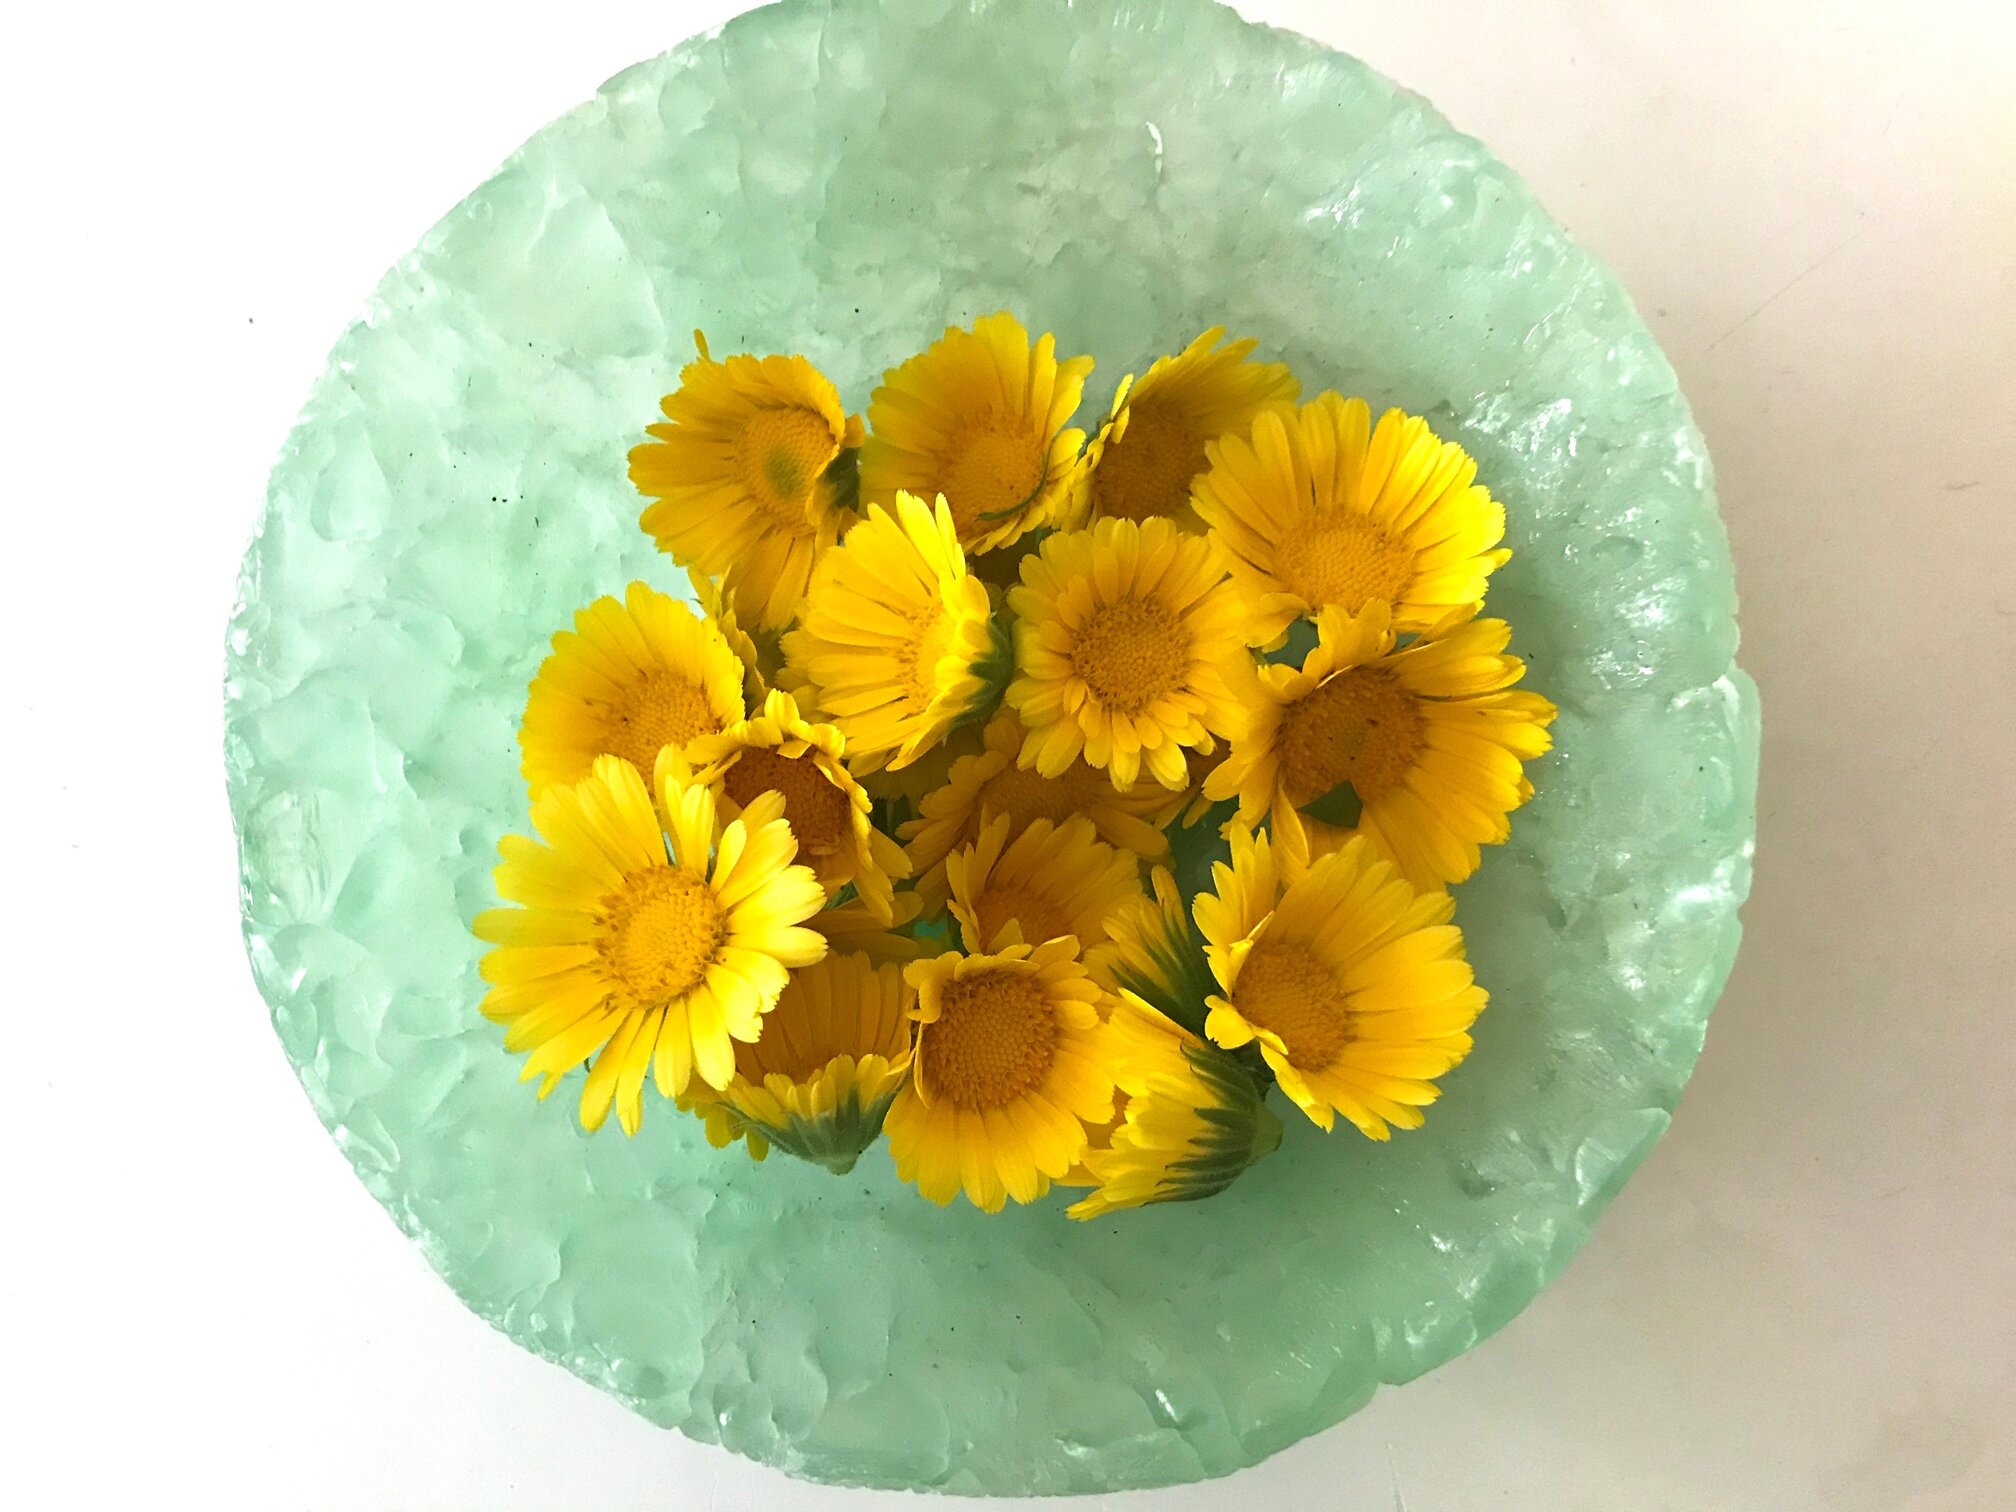 Using and Growing Edible Flowers for Floral Design